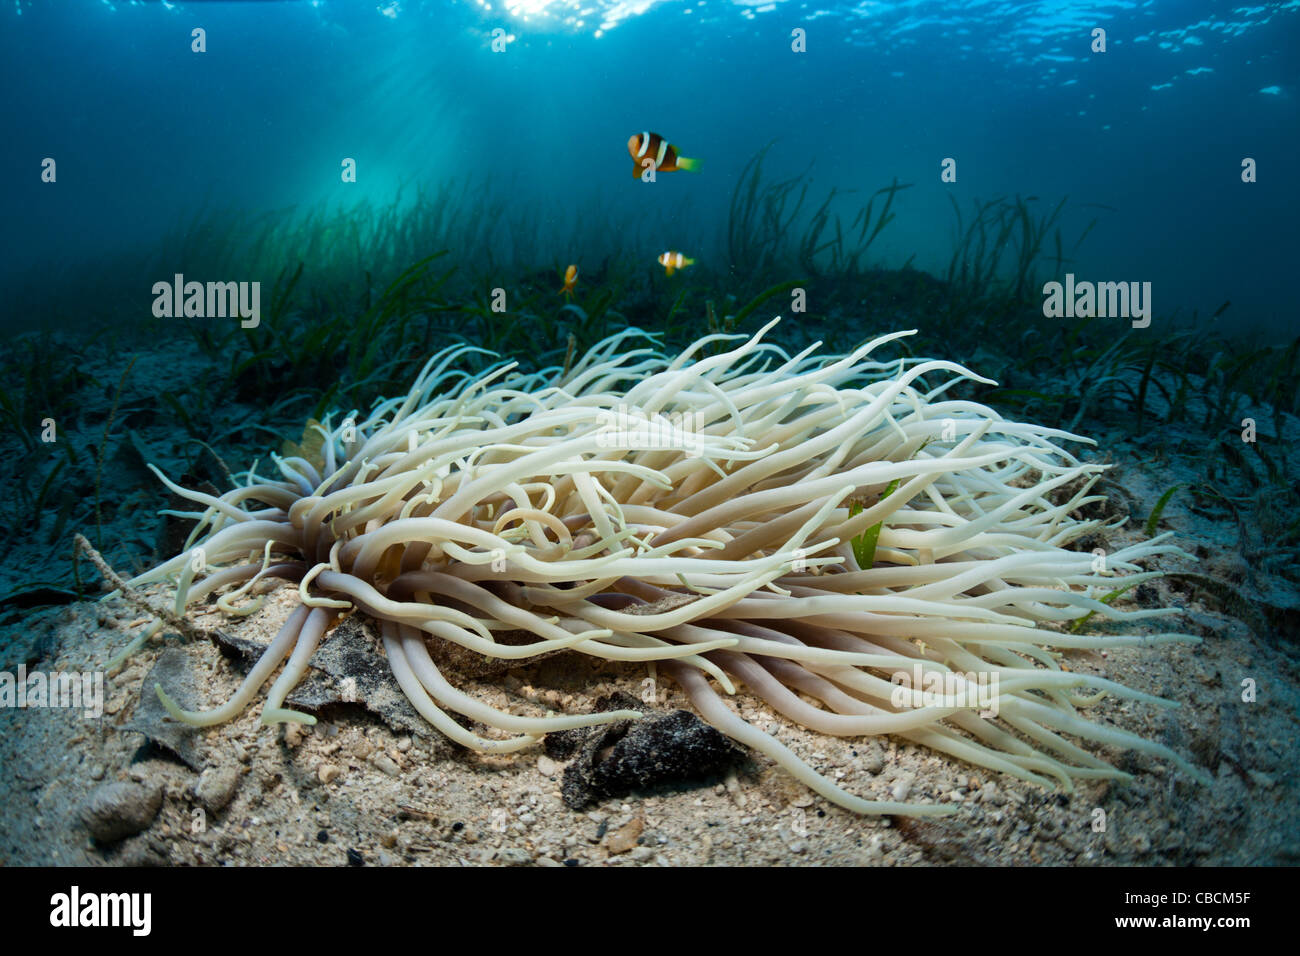 Leather Sea Anemone with Clarks Anemonefish in Seagrass Meadows Heteractis crispa Amphiprion clarki, Cenderawasih Bay Indonesia Stock Photo